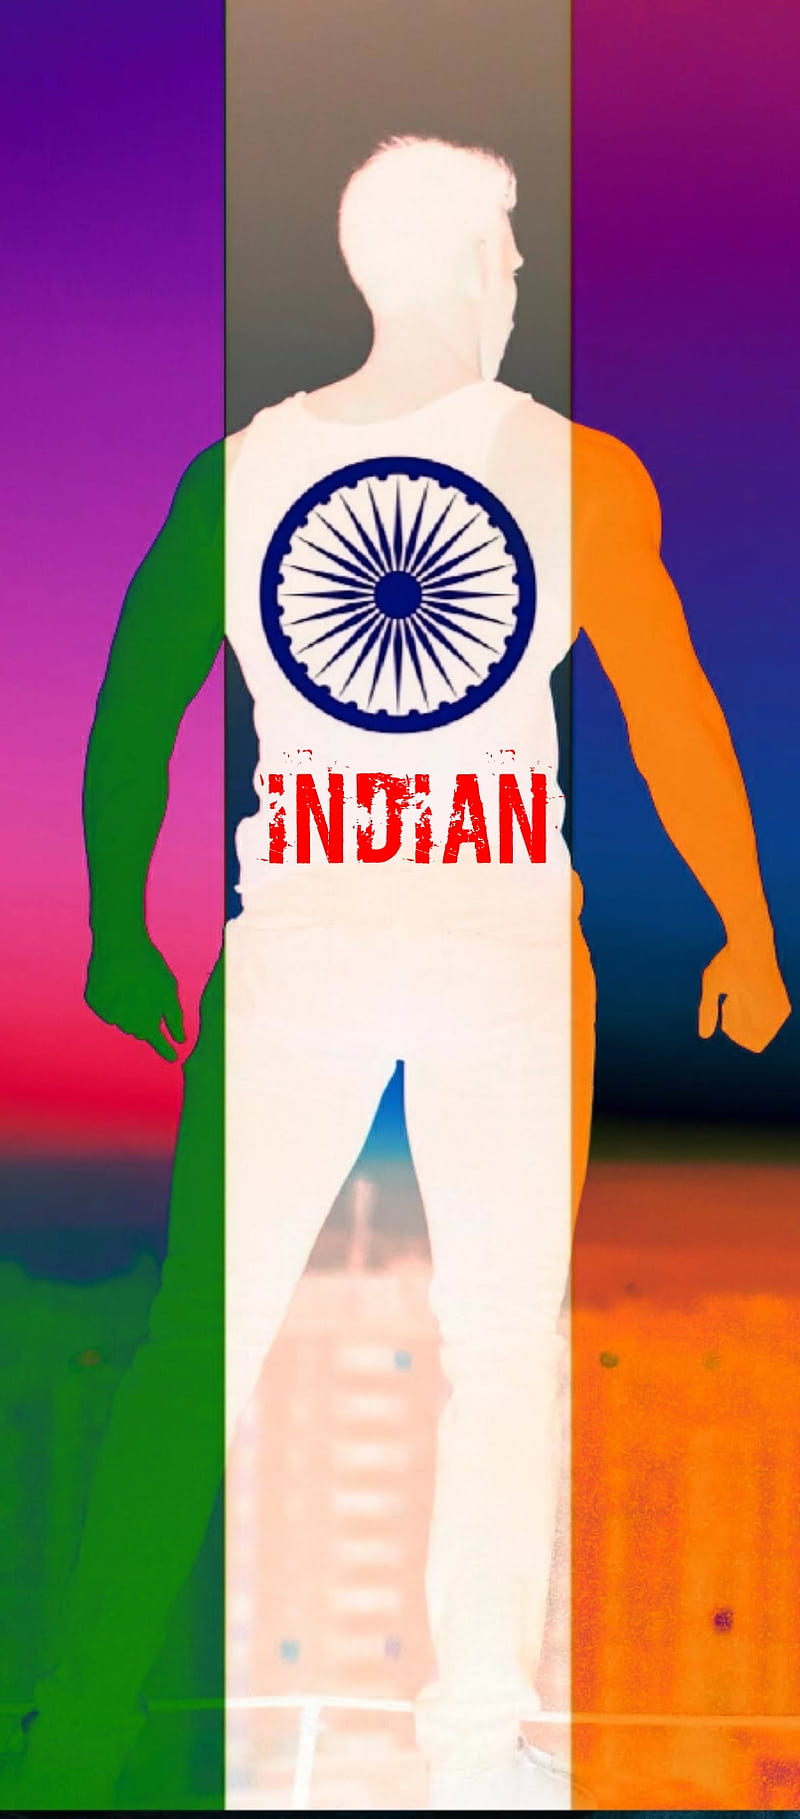 INDIAN, 15 august, 26 january, i love india, independence day, republic day, HD phone wallpaper